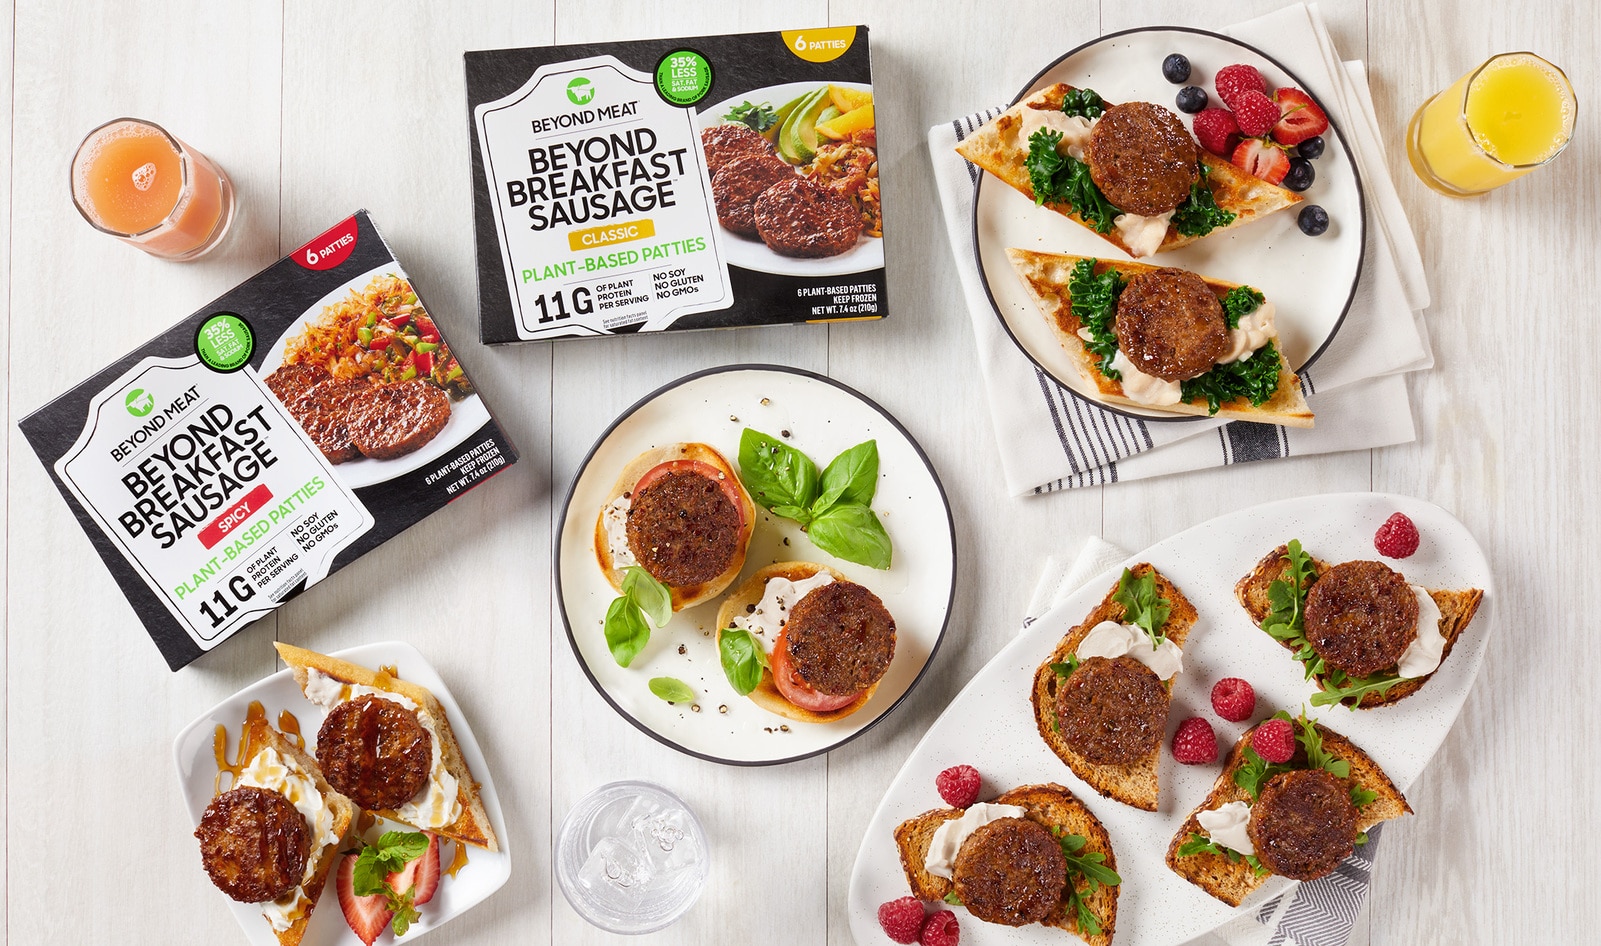 Beyond Meat’s Vegan Breakfast Sausage Expands to 5,000 Stores Nationwide